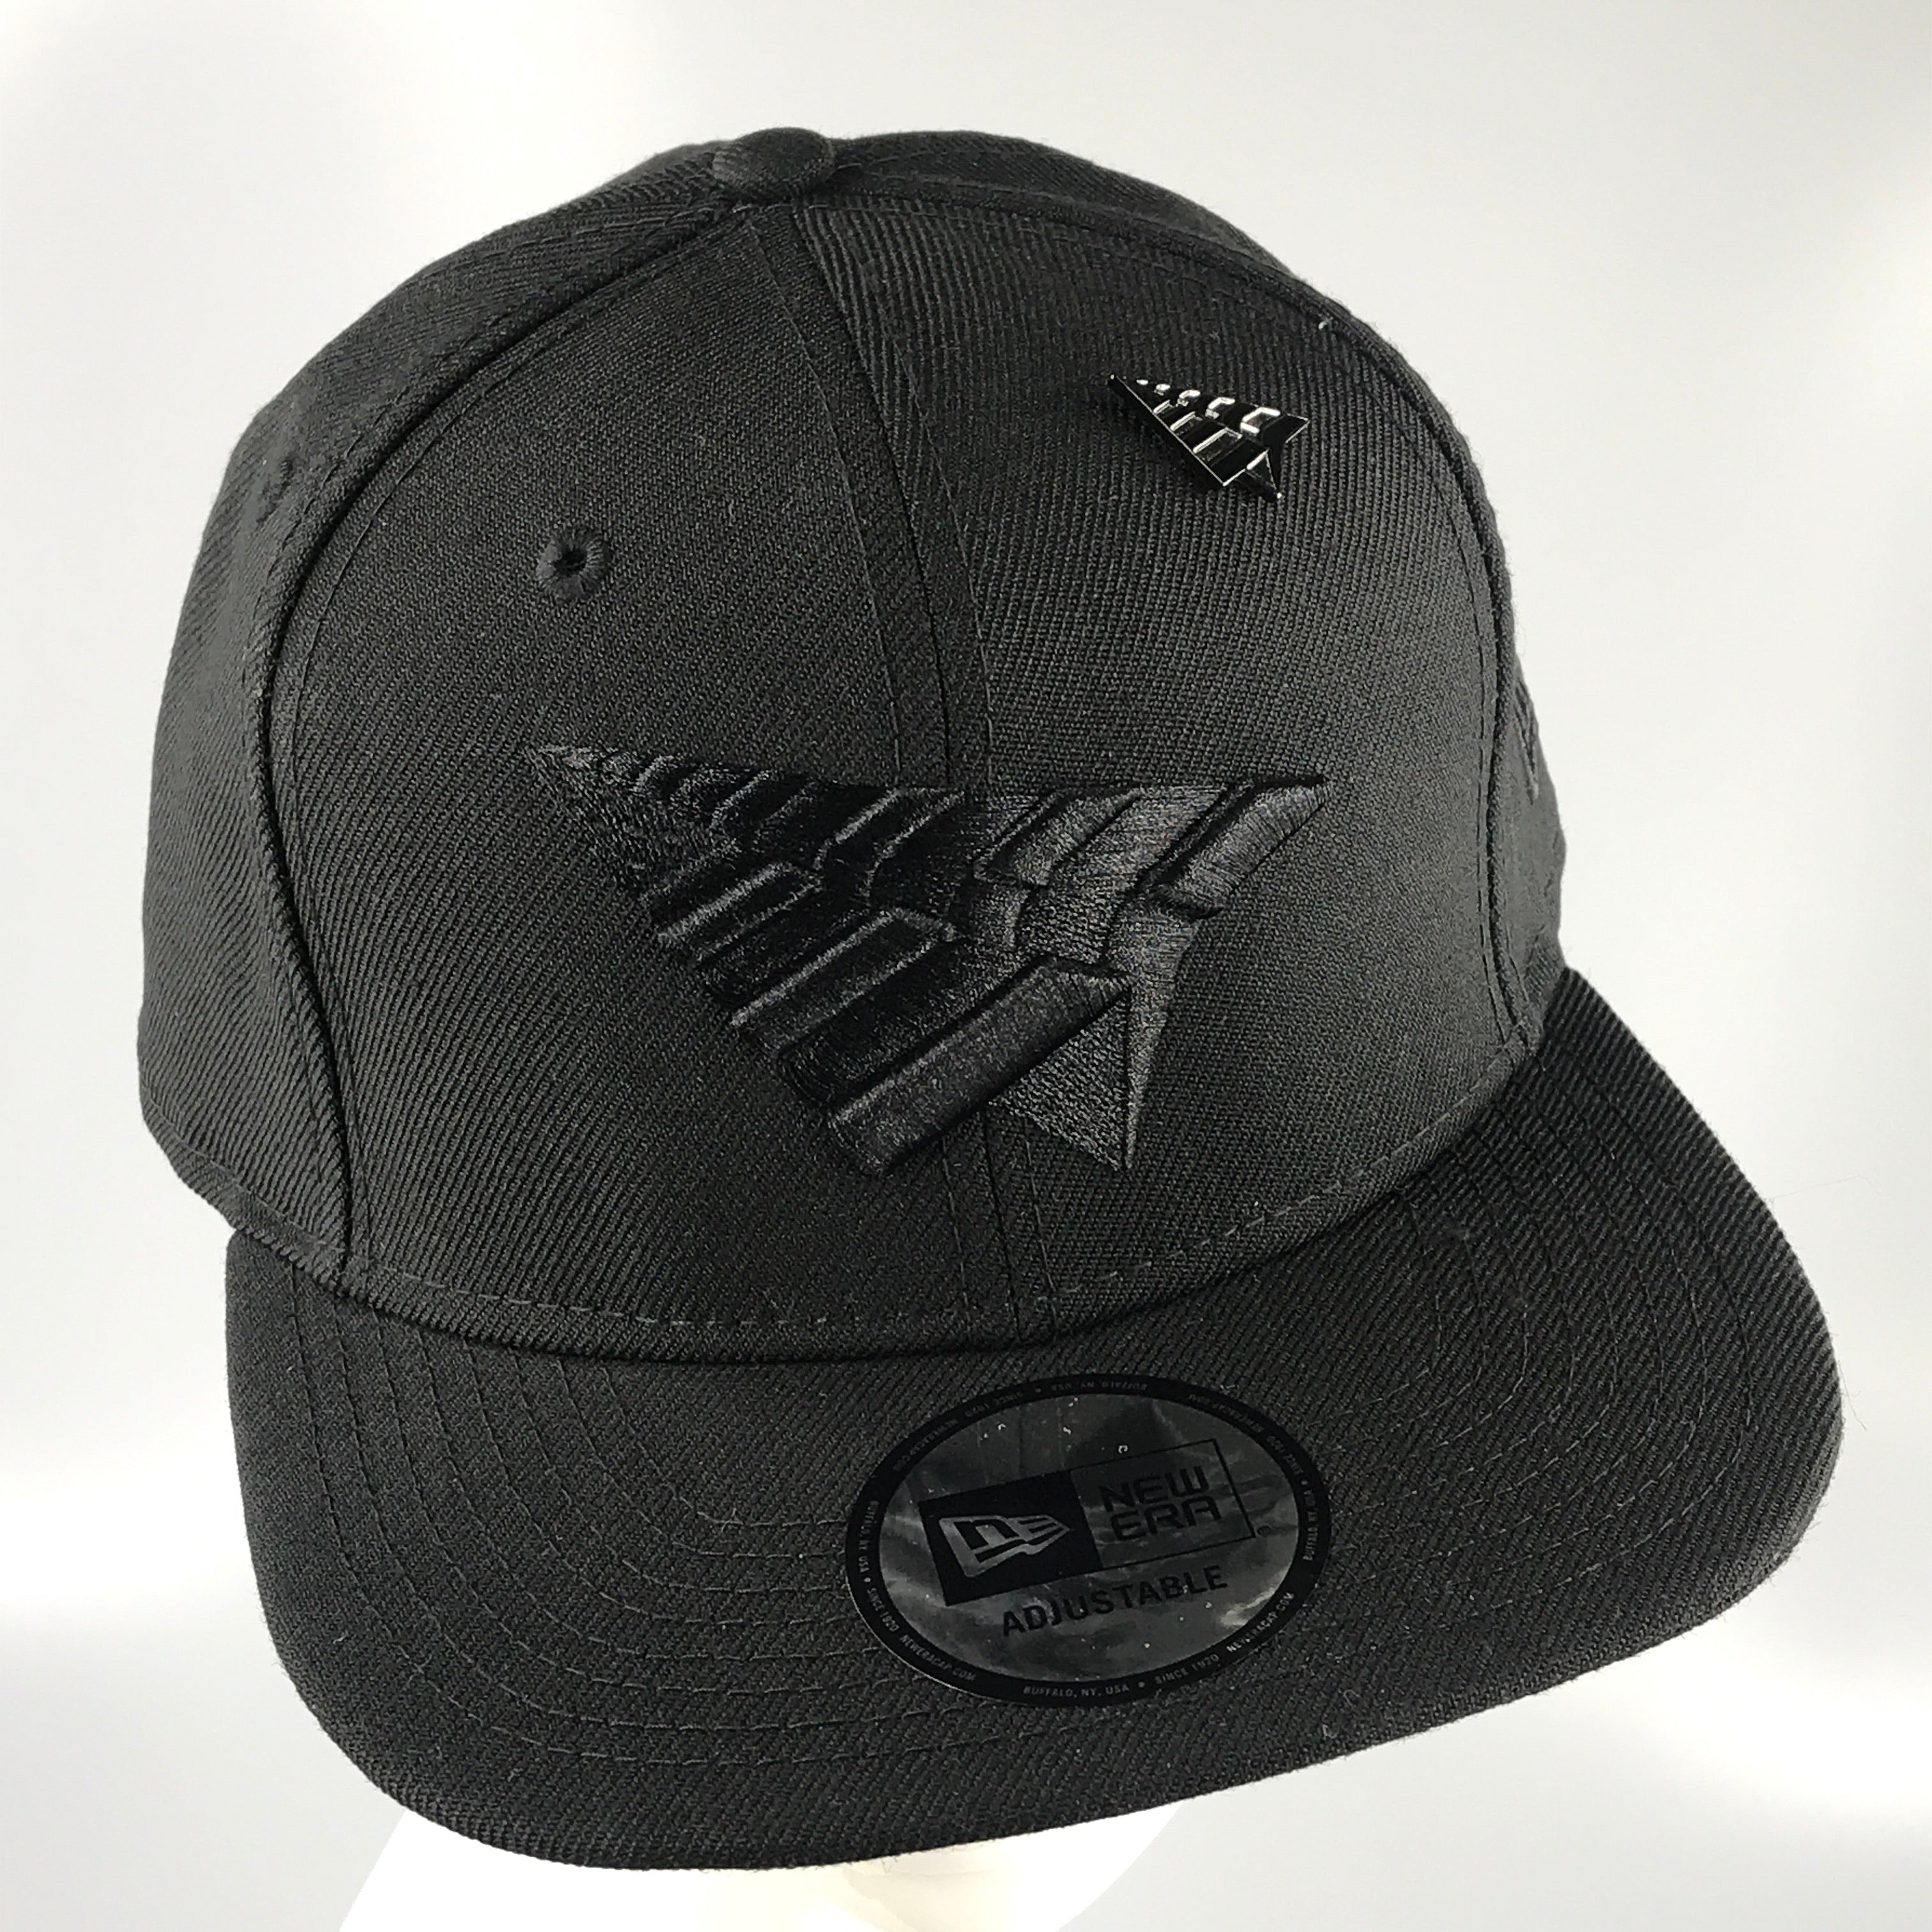 Paper Planes blackout crown 9FIFTY snapback hat